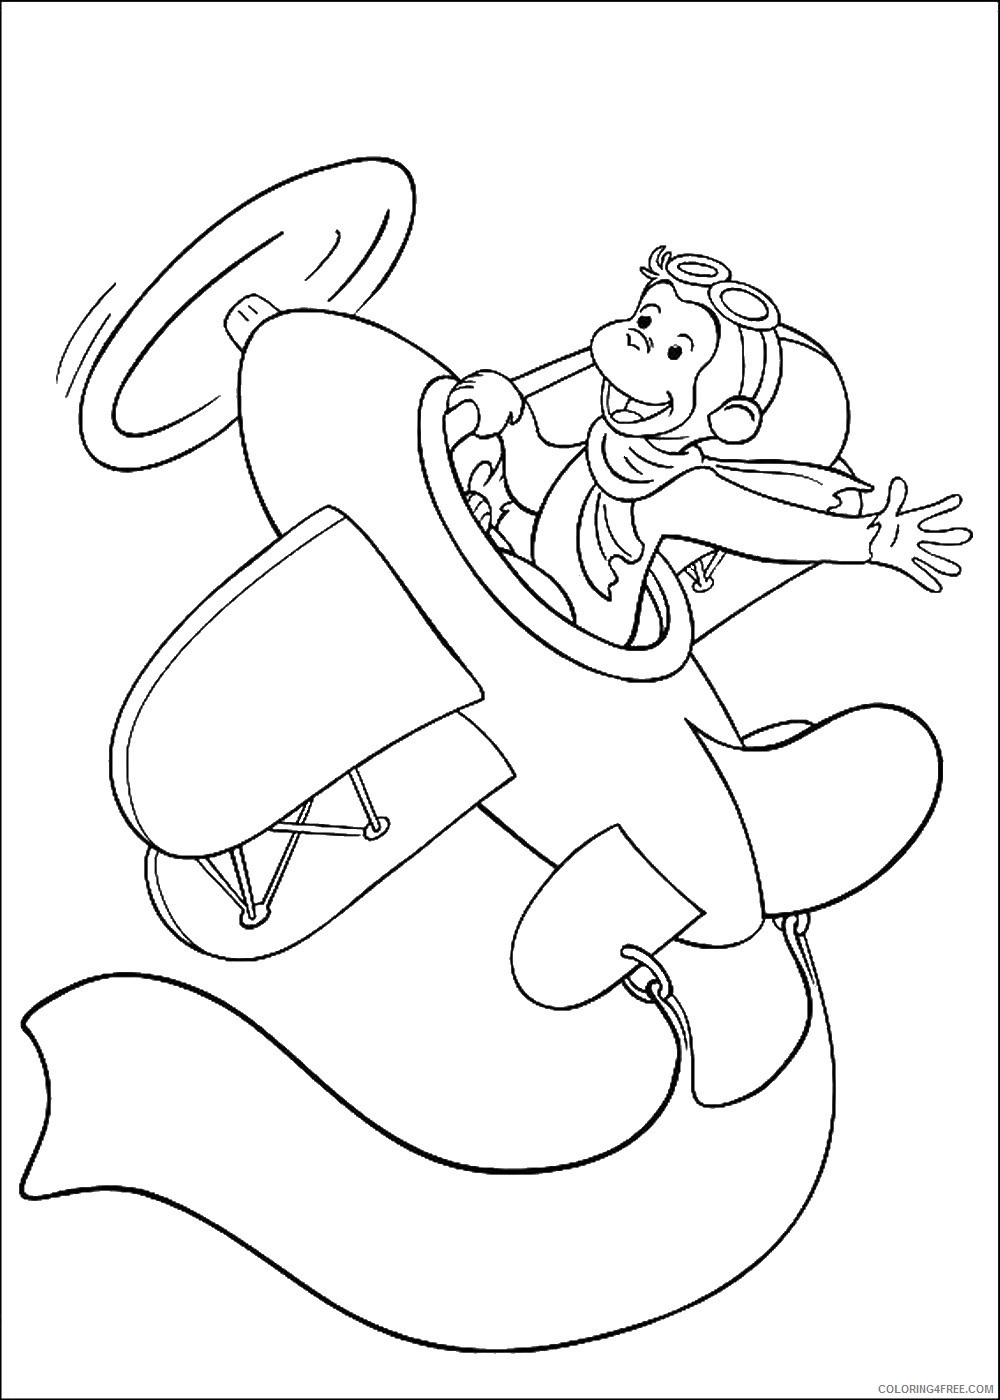 Curious George Coloring Pages Cartoons curious_george_cl31 Printable 2020 1897 Coloring4free